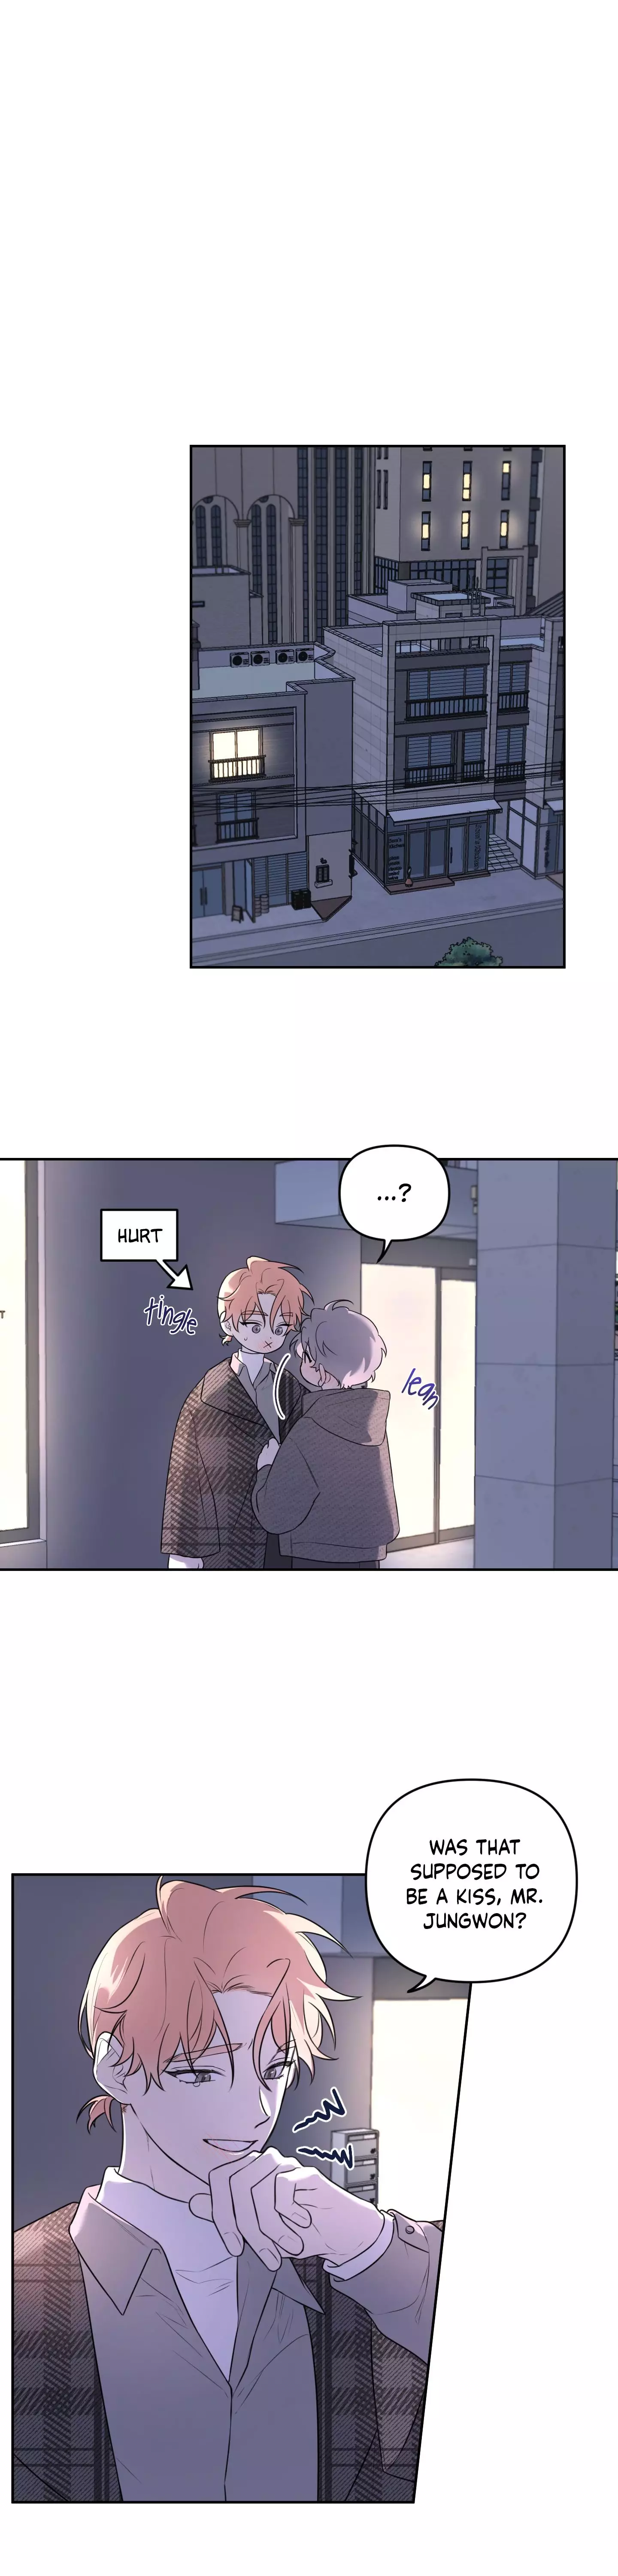 Jungwon’S Flowers - 4 page 2-1339e4a6